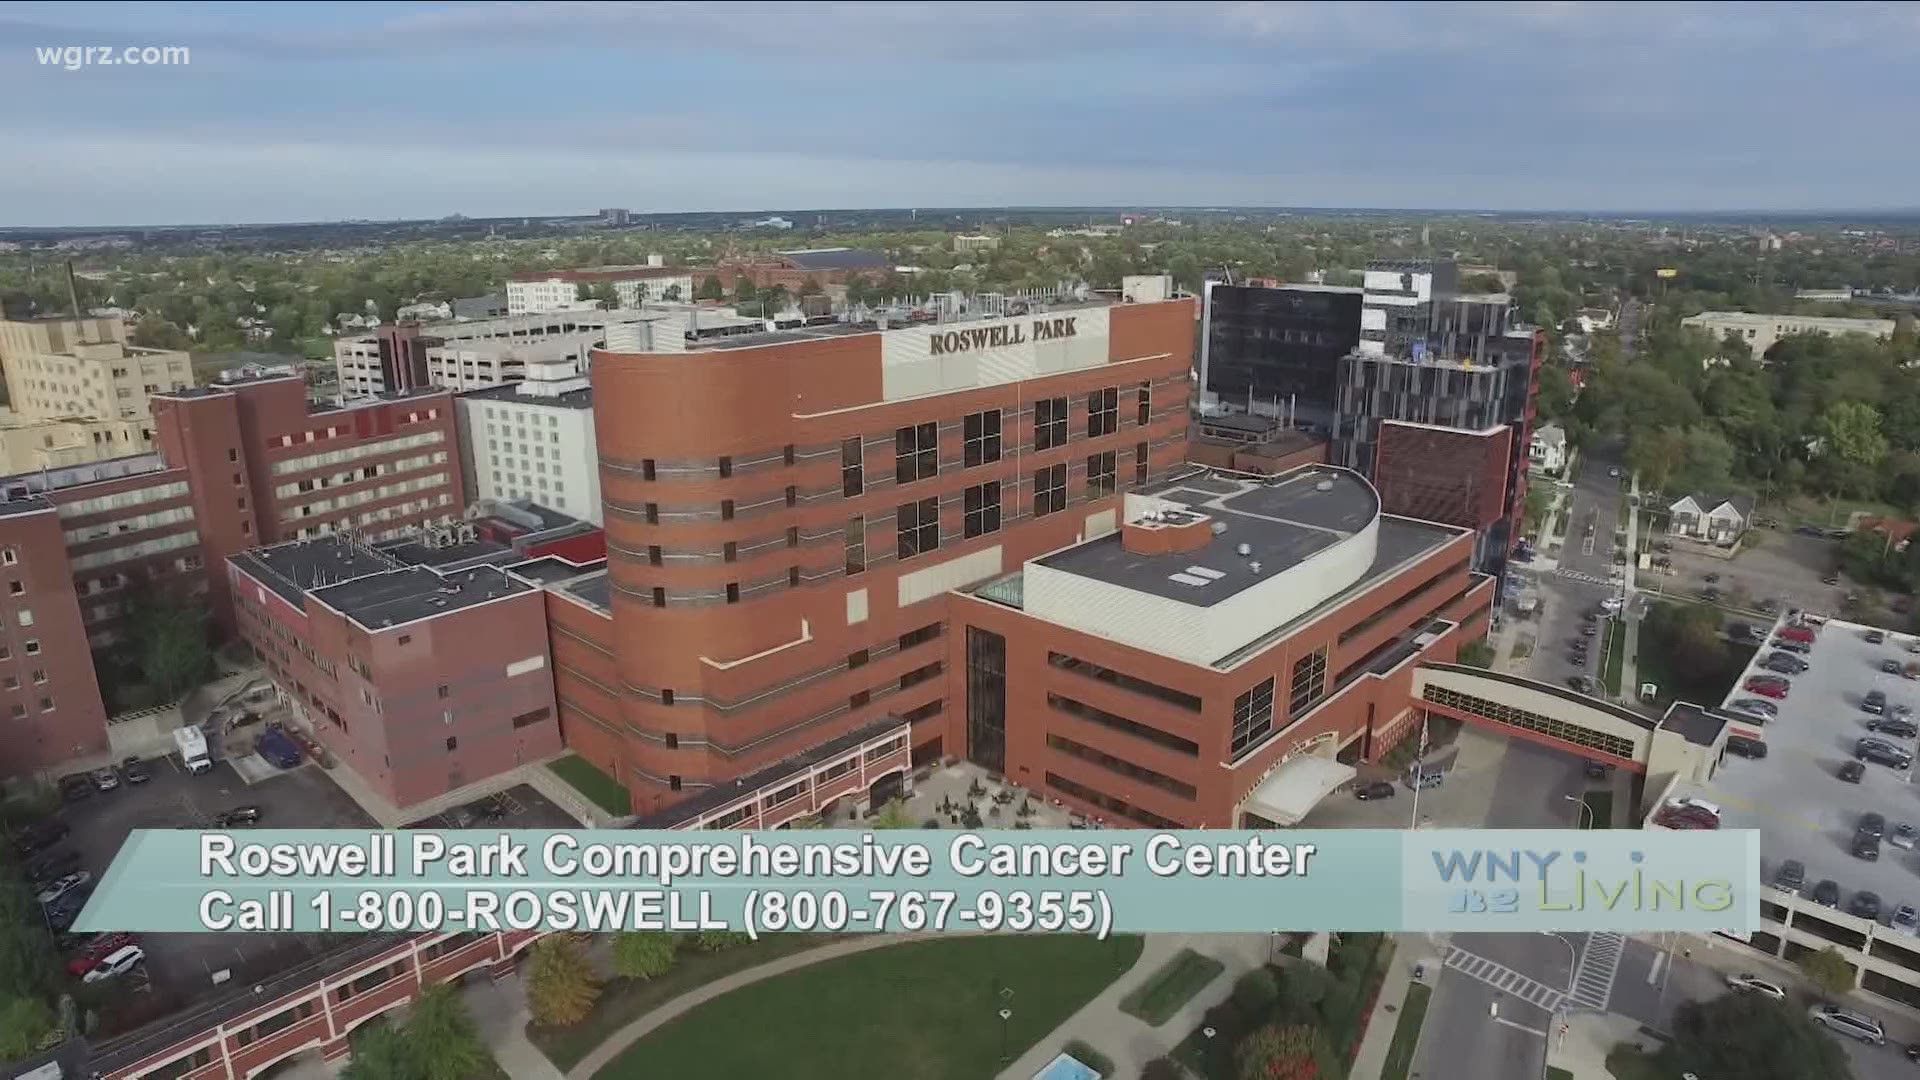 WNY Living - March 27 - Roswell Park Comprehensive Cancer Center (THIS VIDEO IS SPONSORED BY ROSWELL PARK COMPREHENSIVE CANCER CENTER)